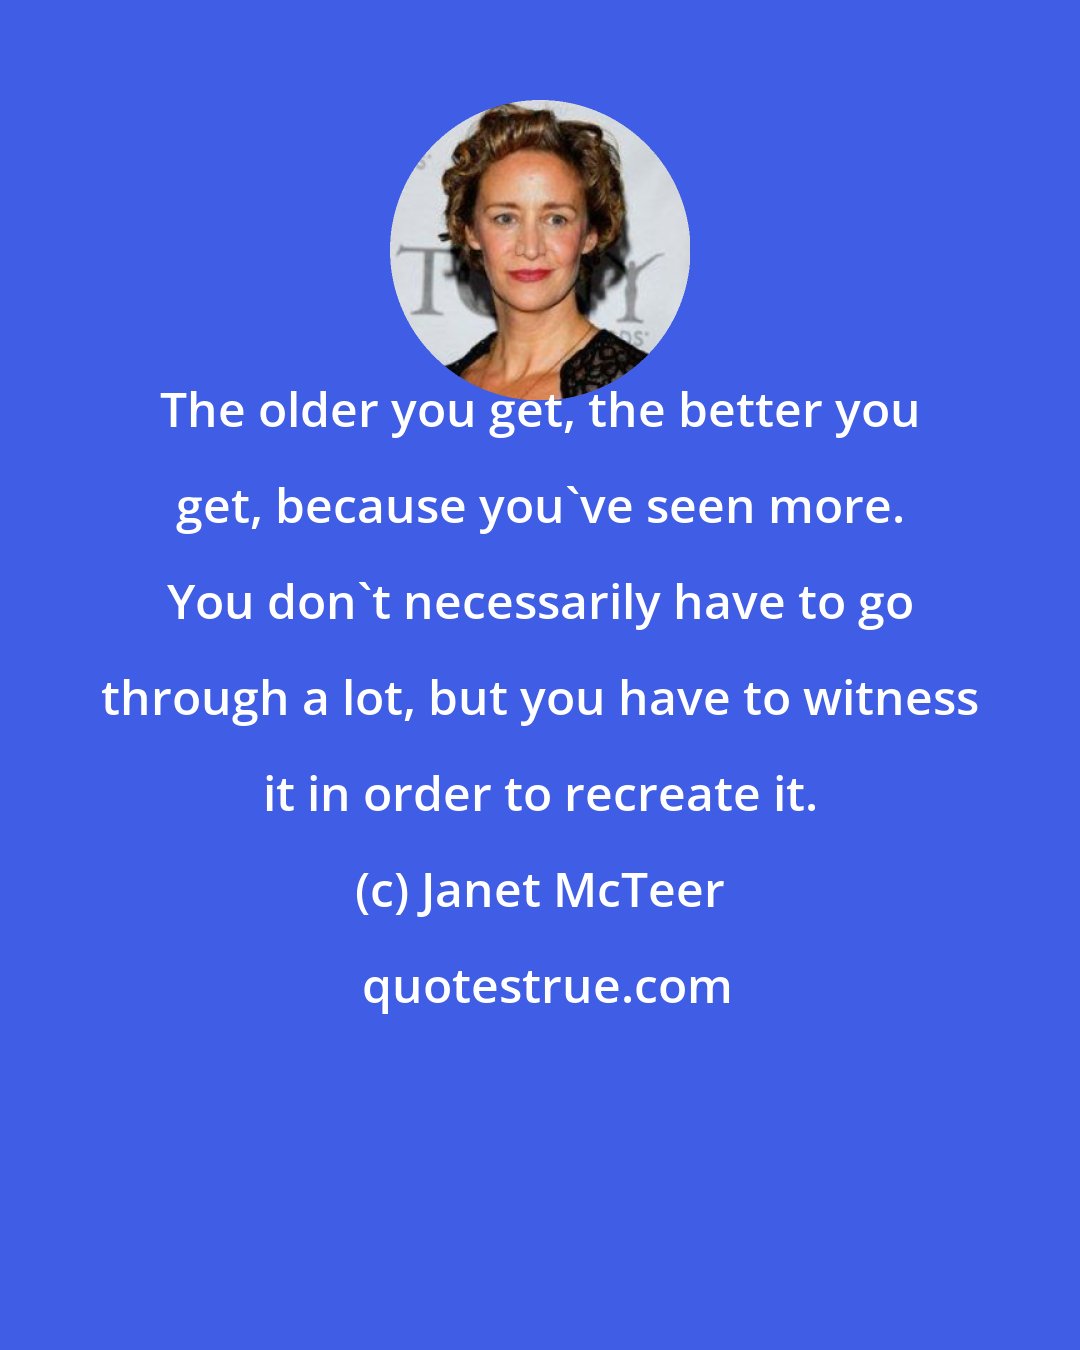 Janet McTeer: The older you get, the better you get, because you've seen more. You don't necessarily have to go through a lot, but you have to witness it in order to recreate it.